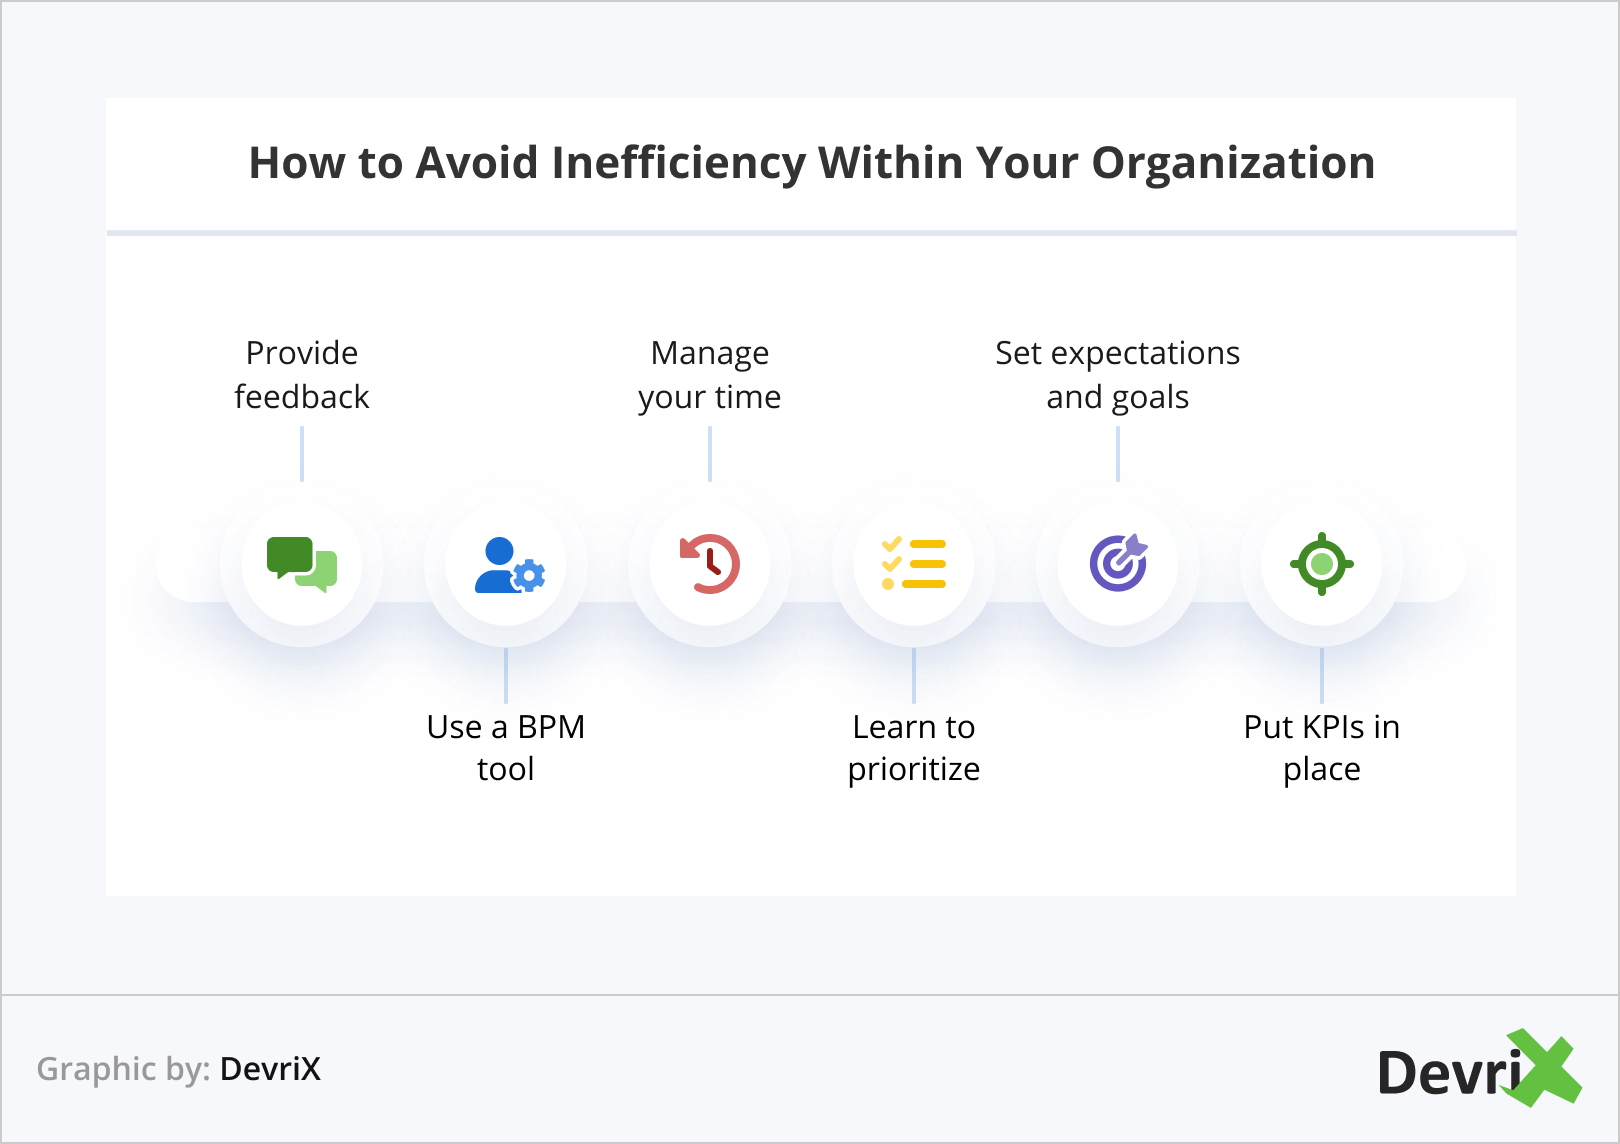 How to Avoid Inefficiency Within Your Organization